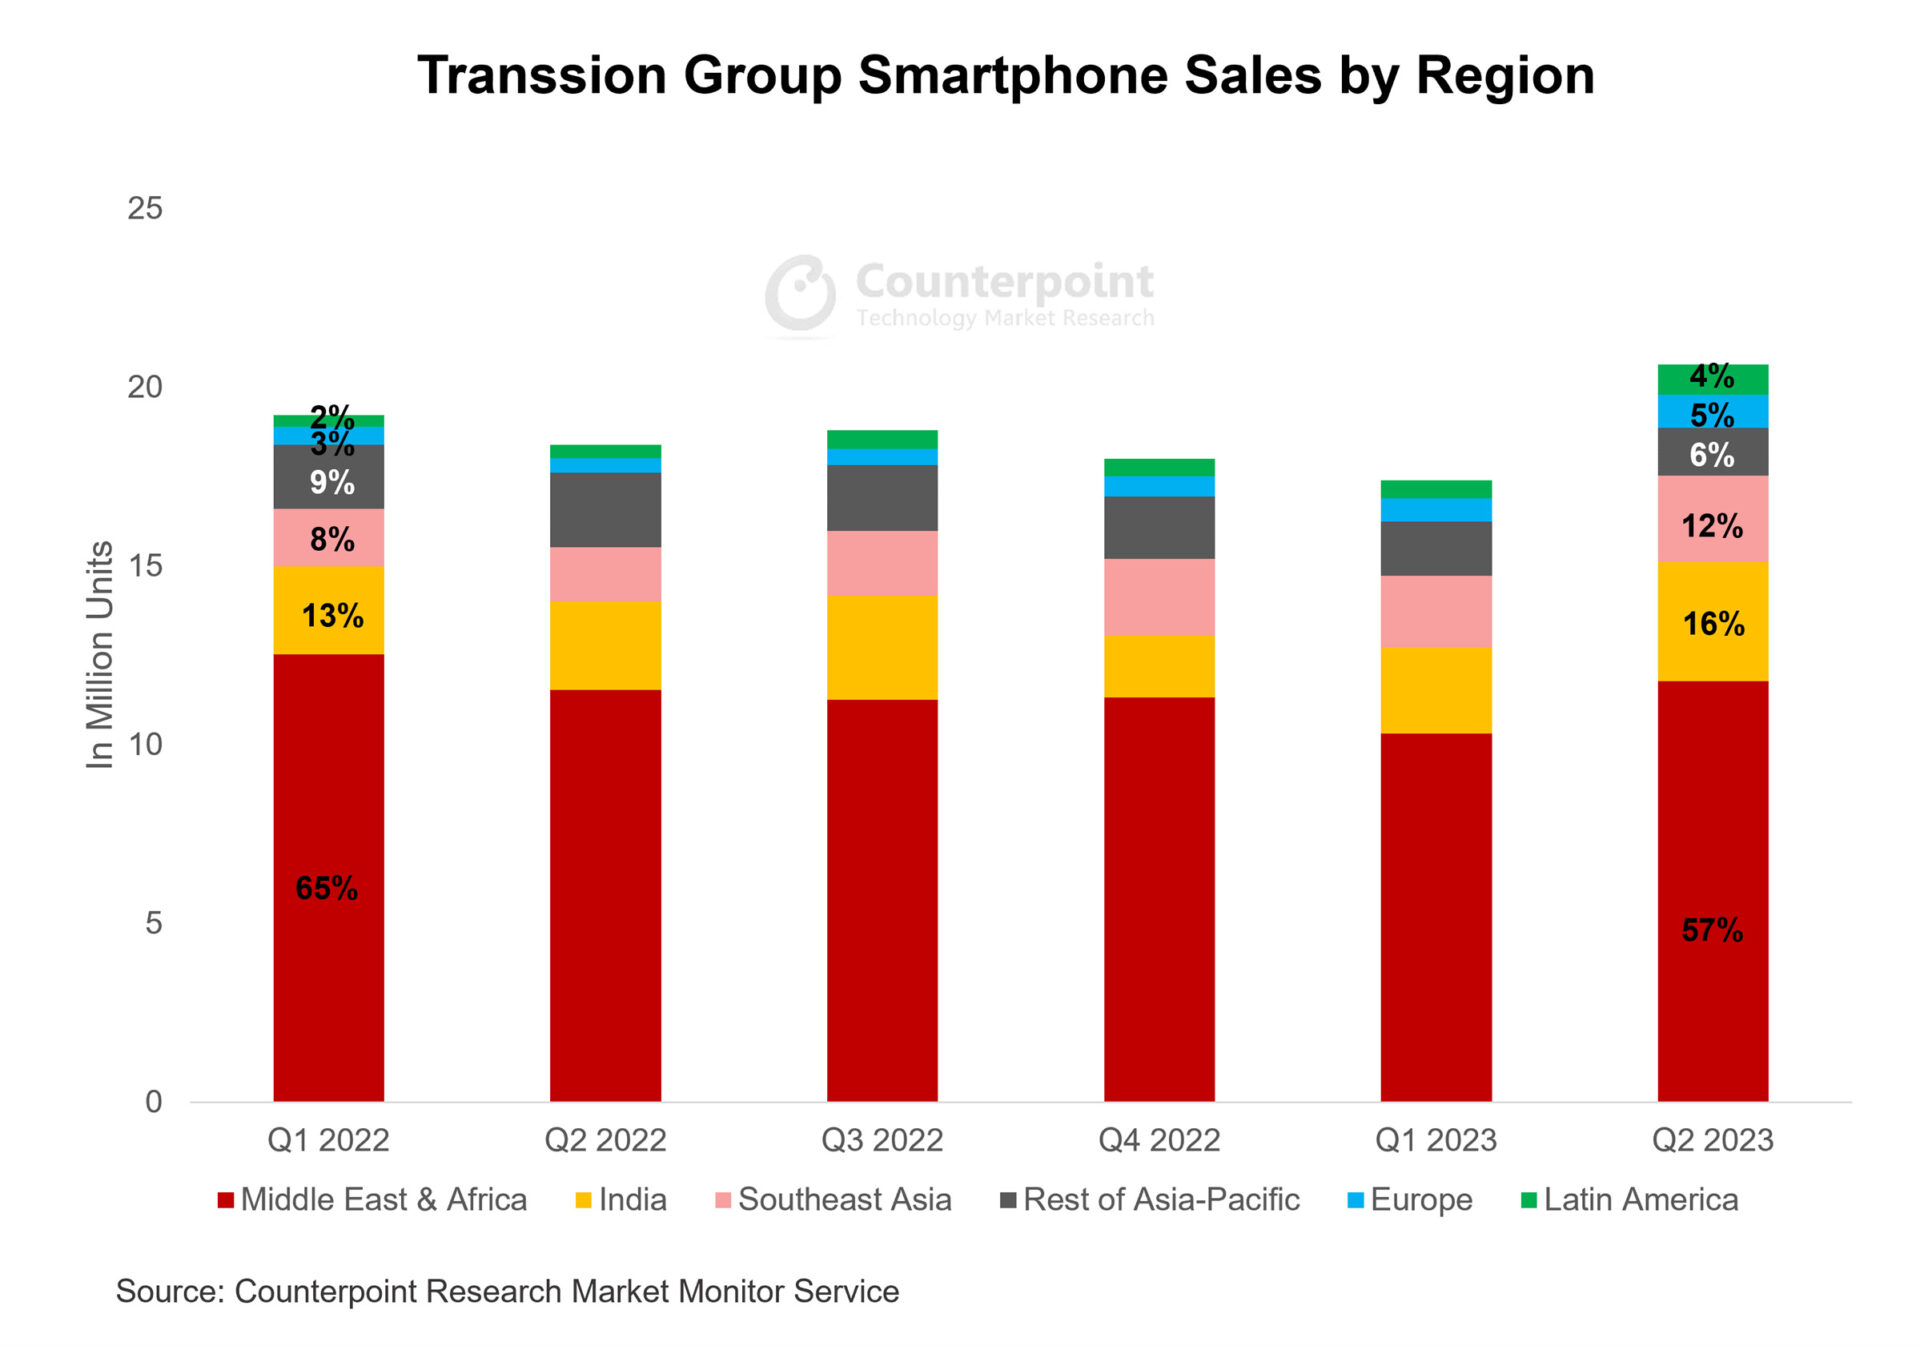 Transsion group smartphone sales by region